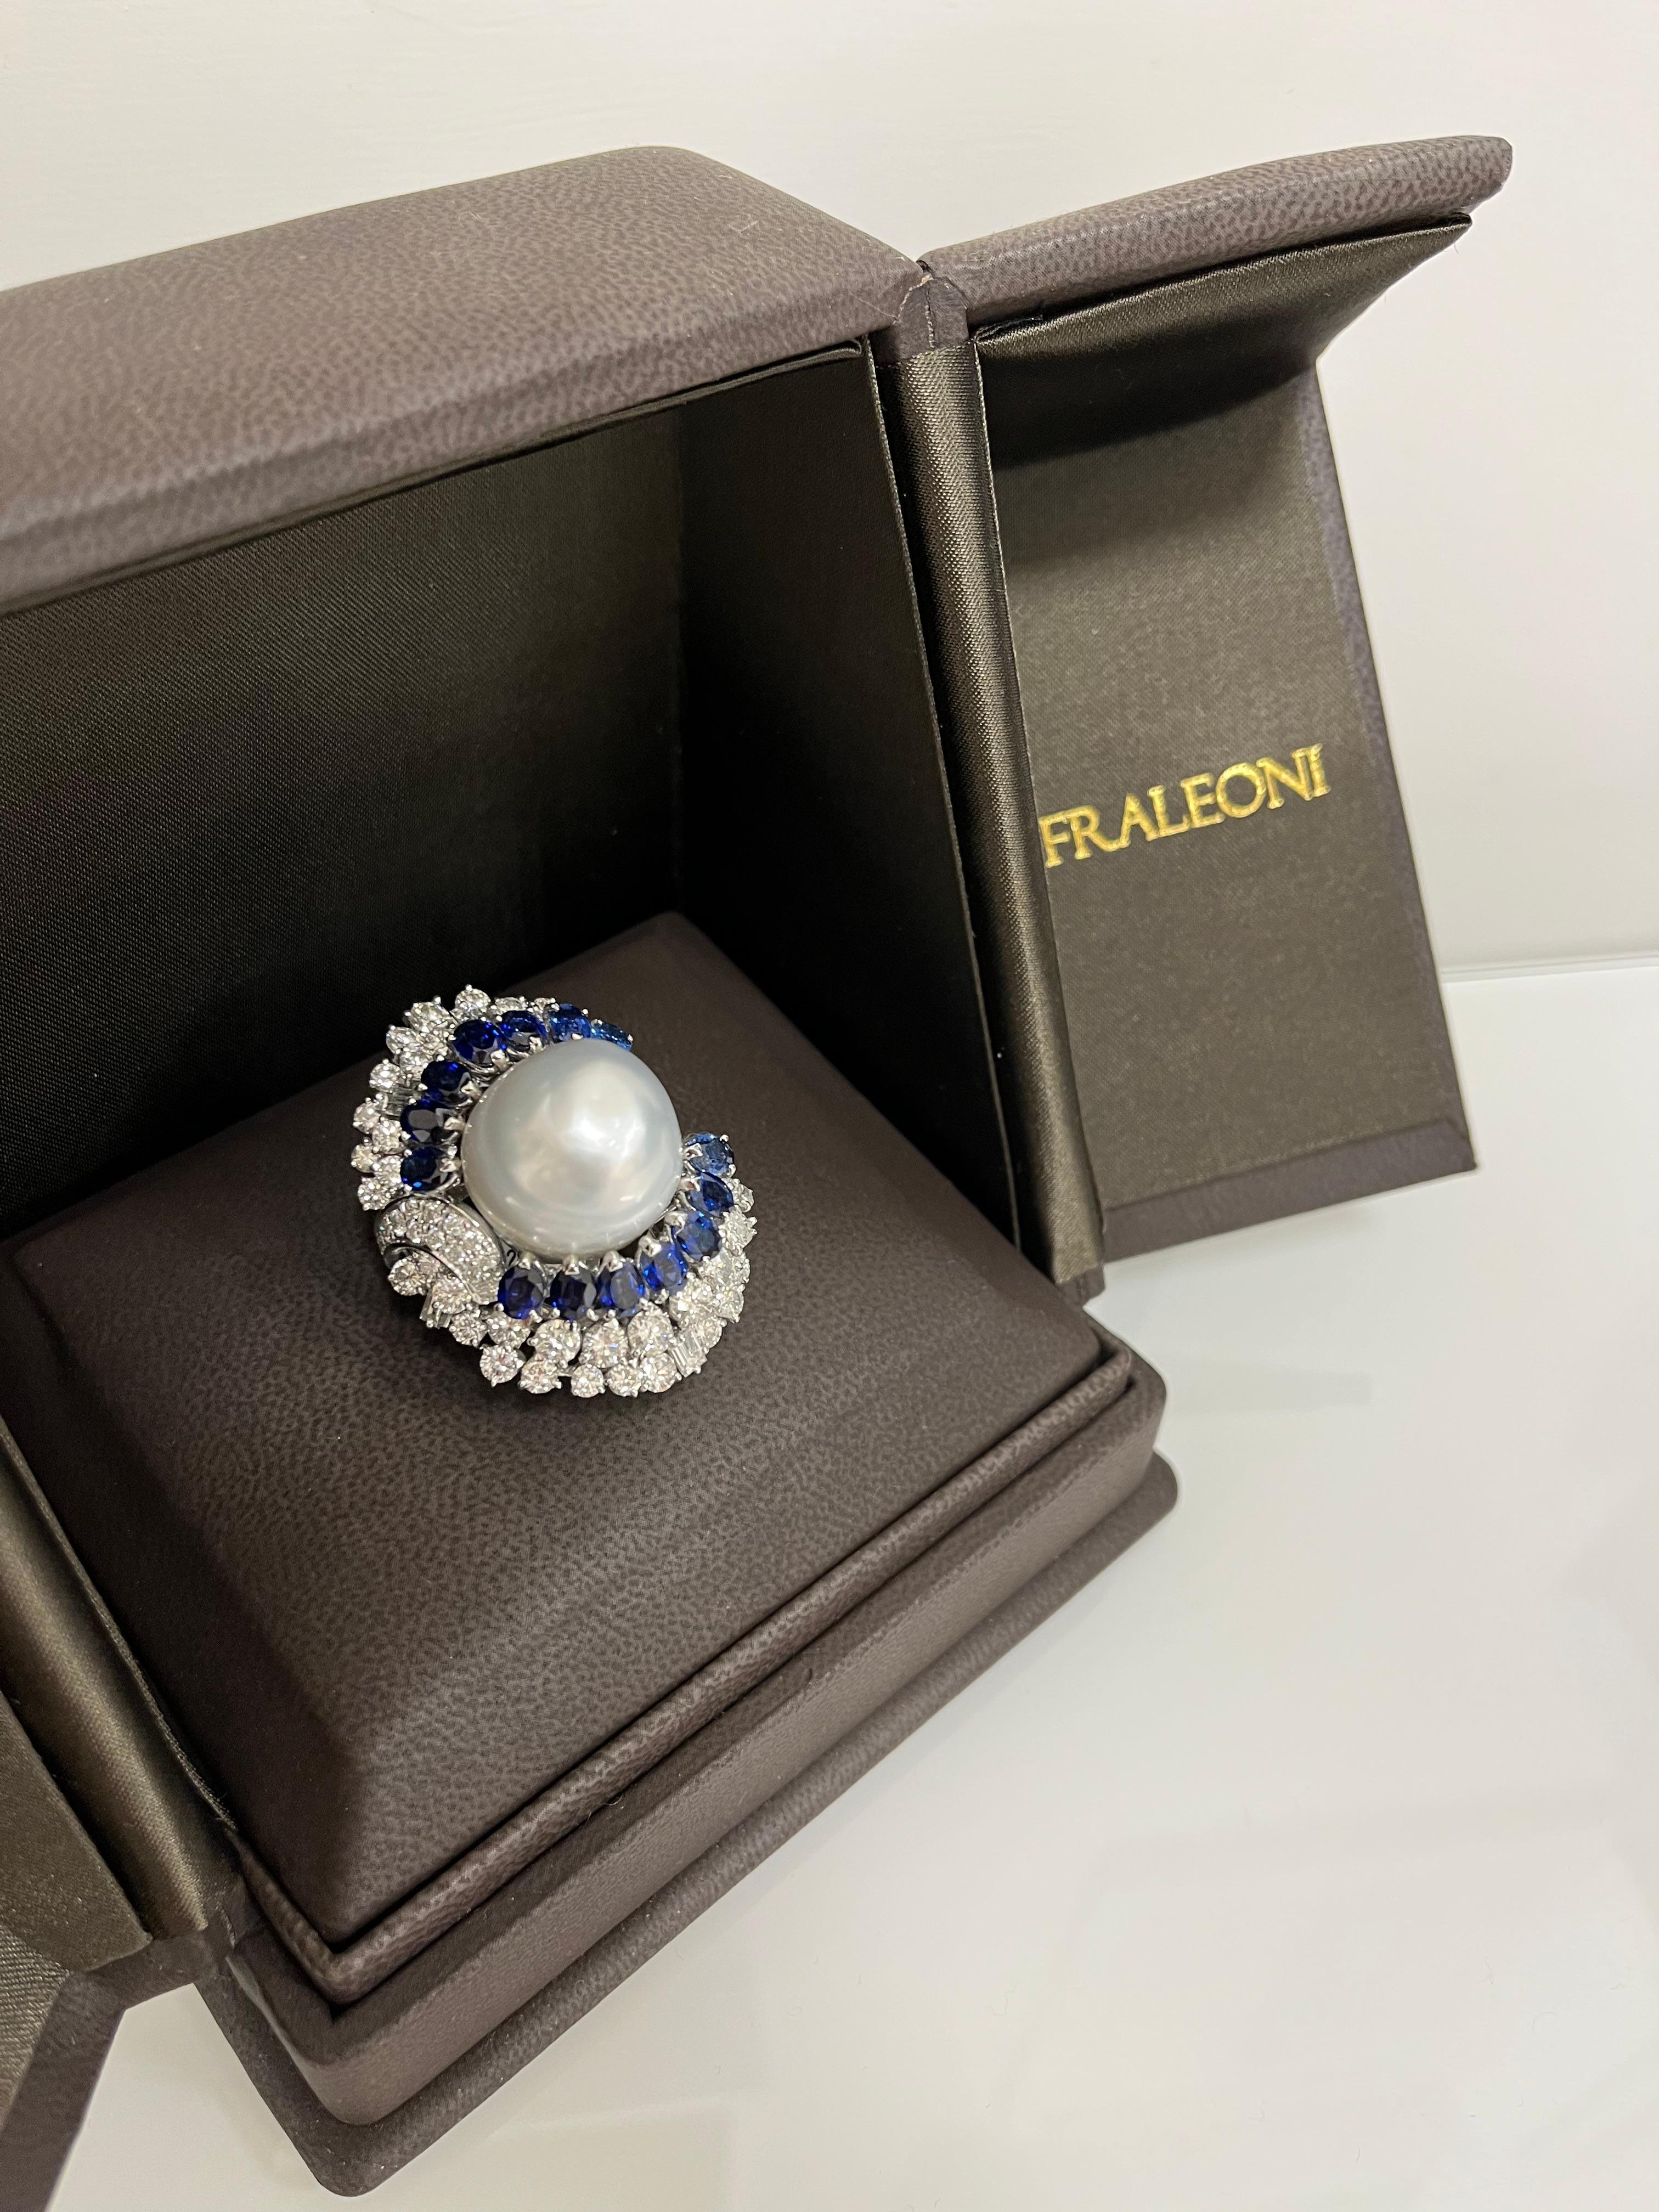 18 Kt. white gold ring with round-cut and emerald-cut diamonds, oval-cut blue sapphires, Australian baroque pearls.
This exceptional ring is one of a kind piece.
The stones are set on three levels of gold.
The third level is featured with a row of